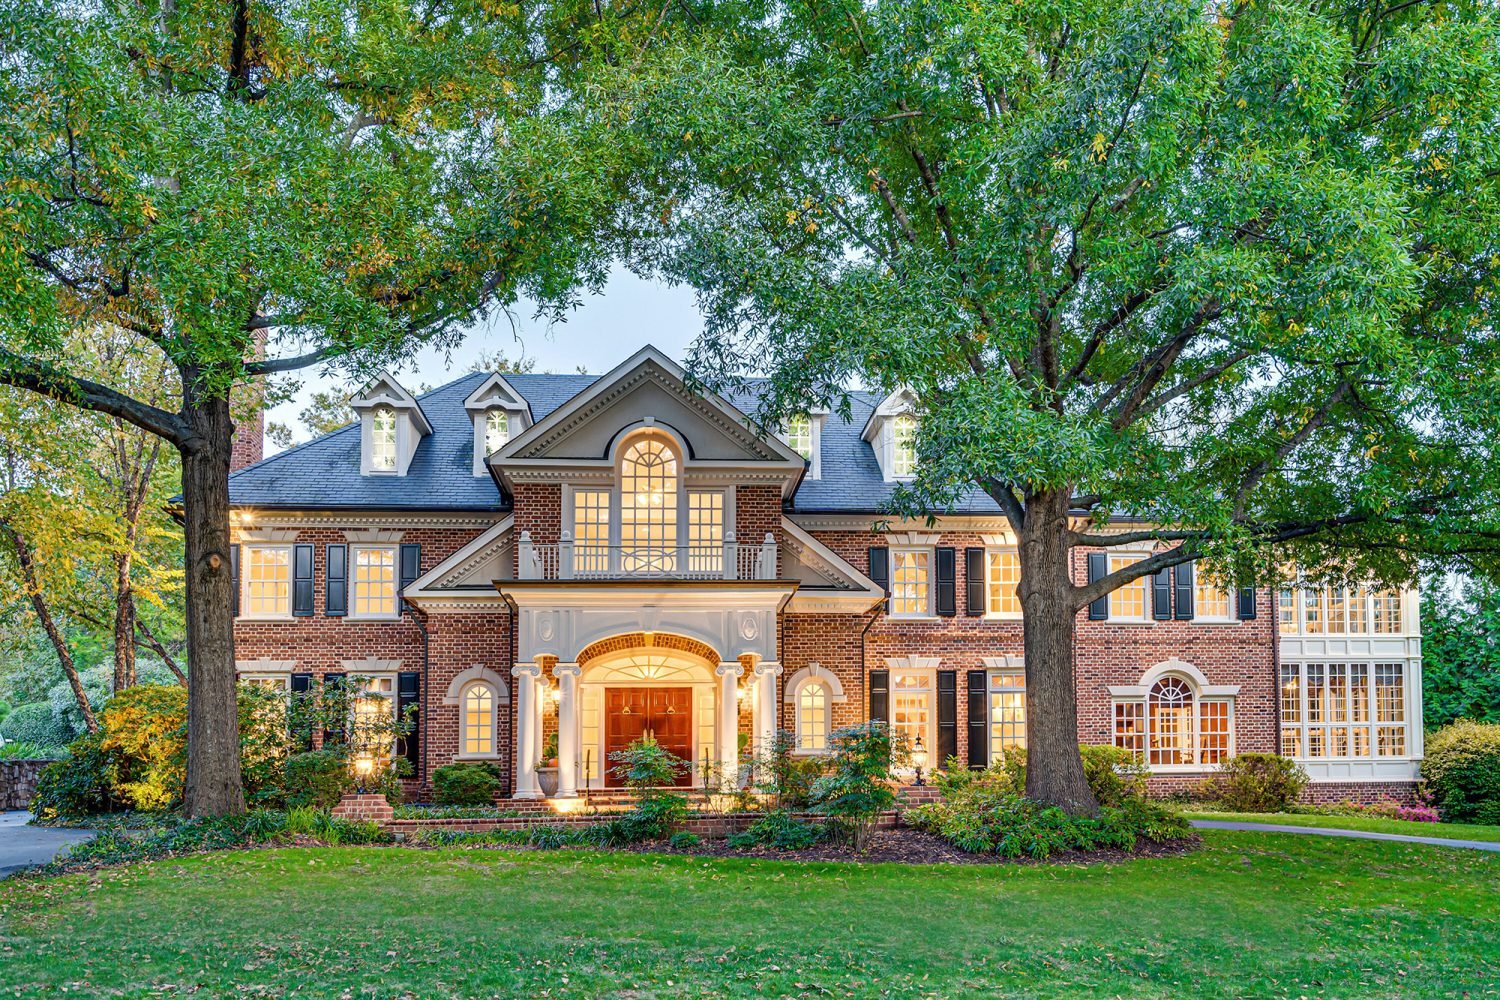 This Magnificent Manor Is Located On One Of McLean’s Most Beautiful Streets